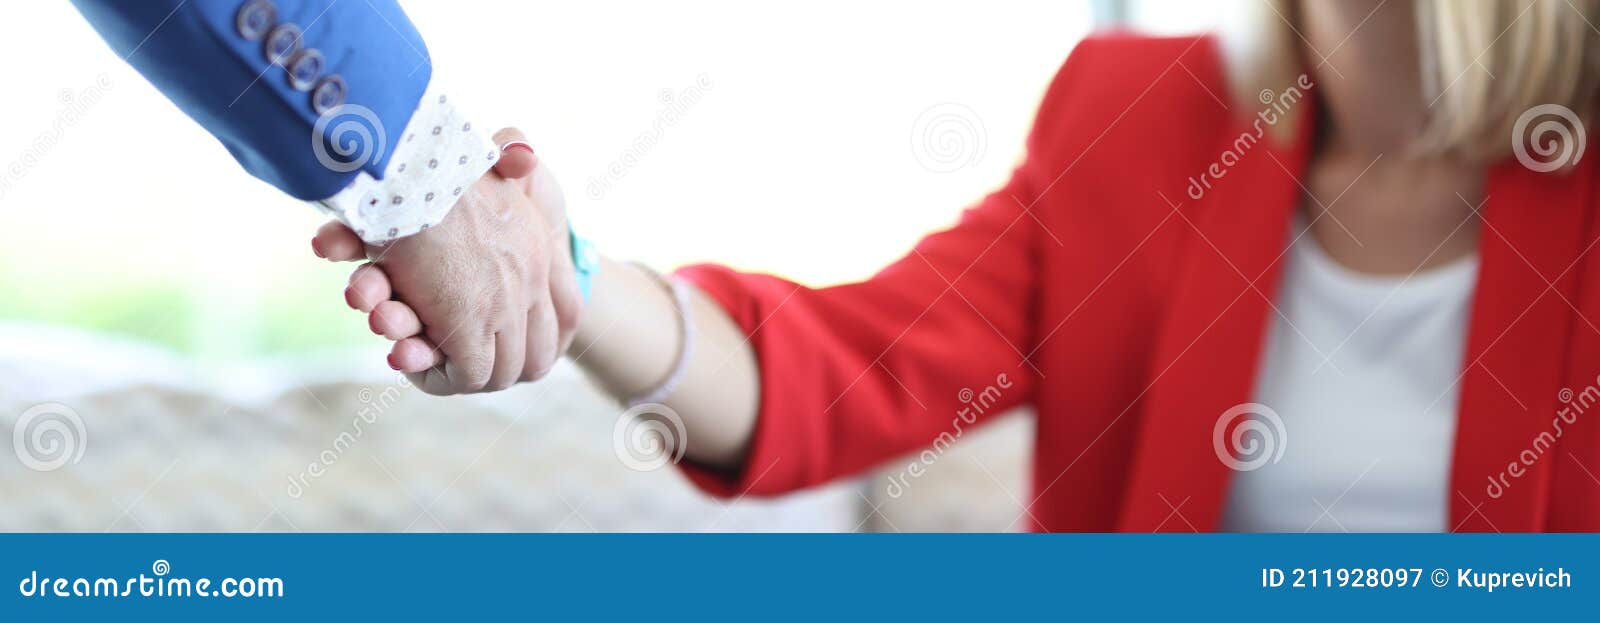 young woman in red jacket shakes man& x27;s hand closeup